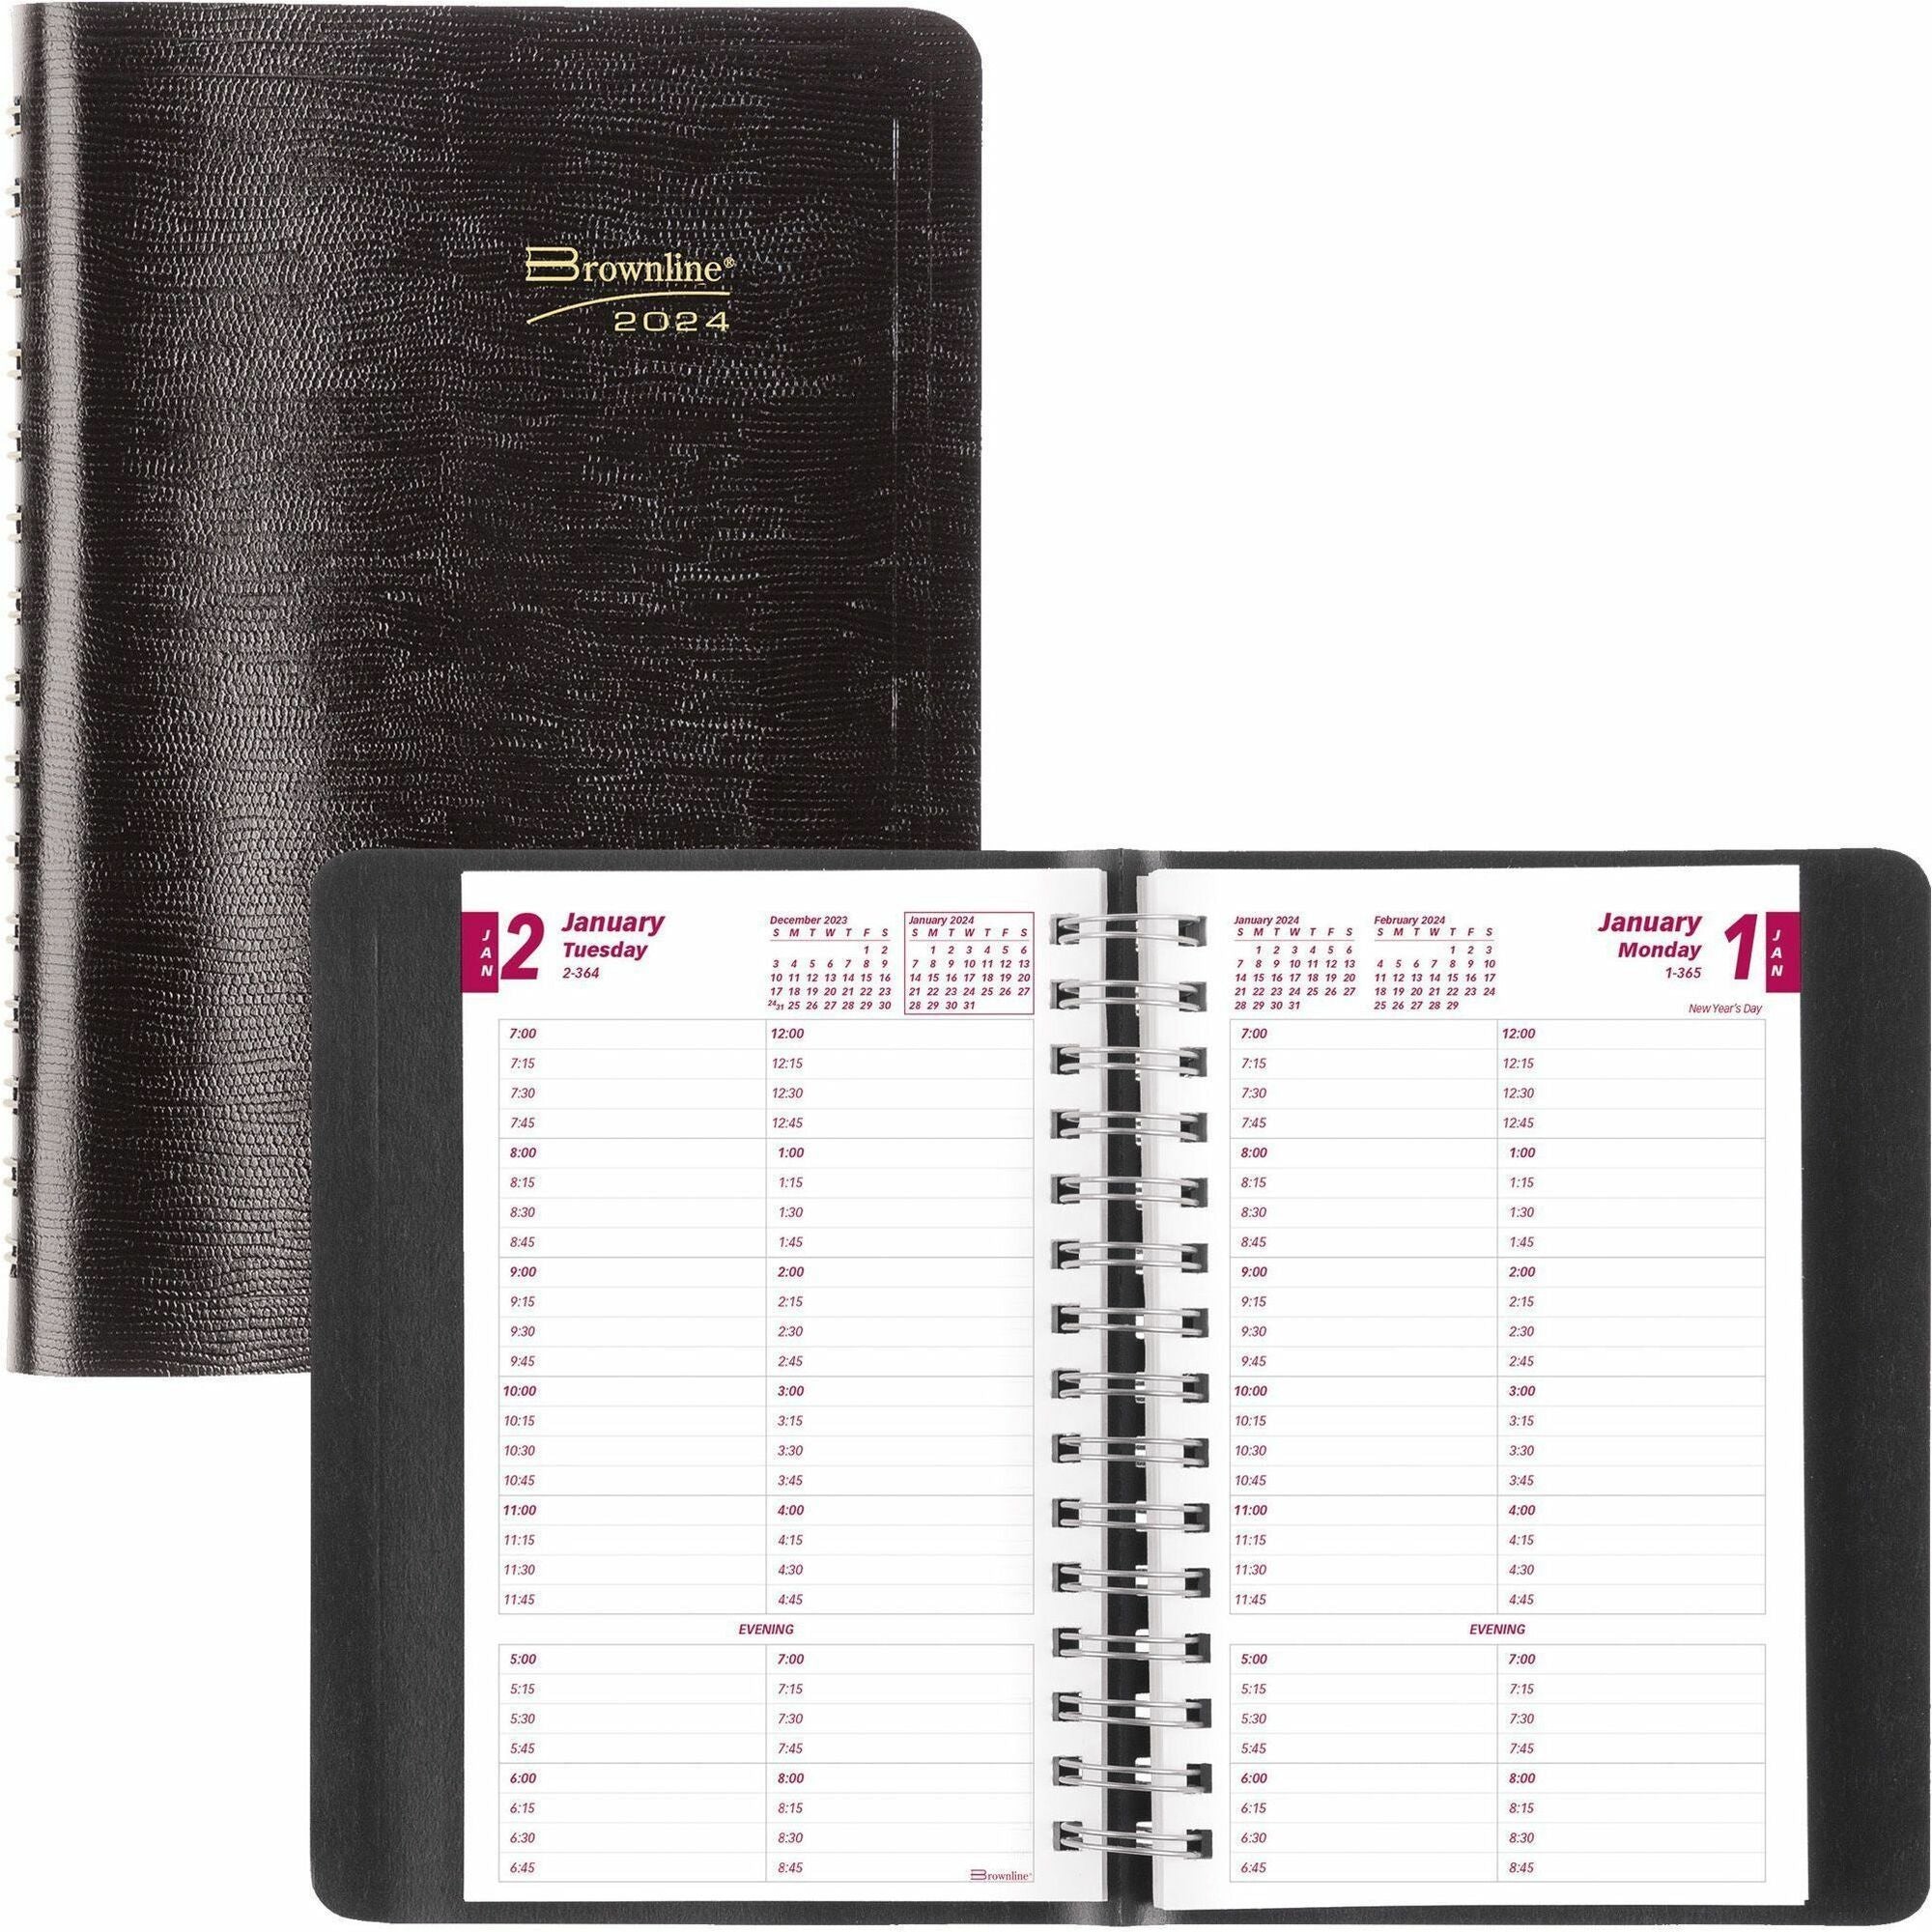 brownline-daily-planner-julian-dates-daily-1-year-january-2024-december-2024-700-am-to-845-pm-quarter-hourly-1-day-single-page-layout-5-x-8-sheet-size-twin-wire-desktop-black-coverphone-directory-address-directory-1-eac_redcb800blk - 1